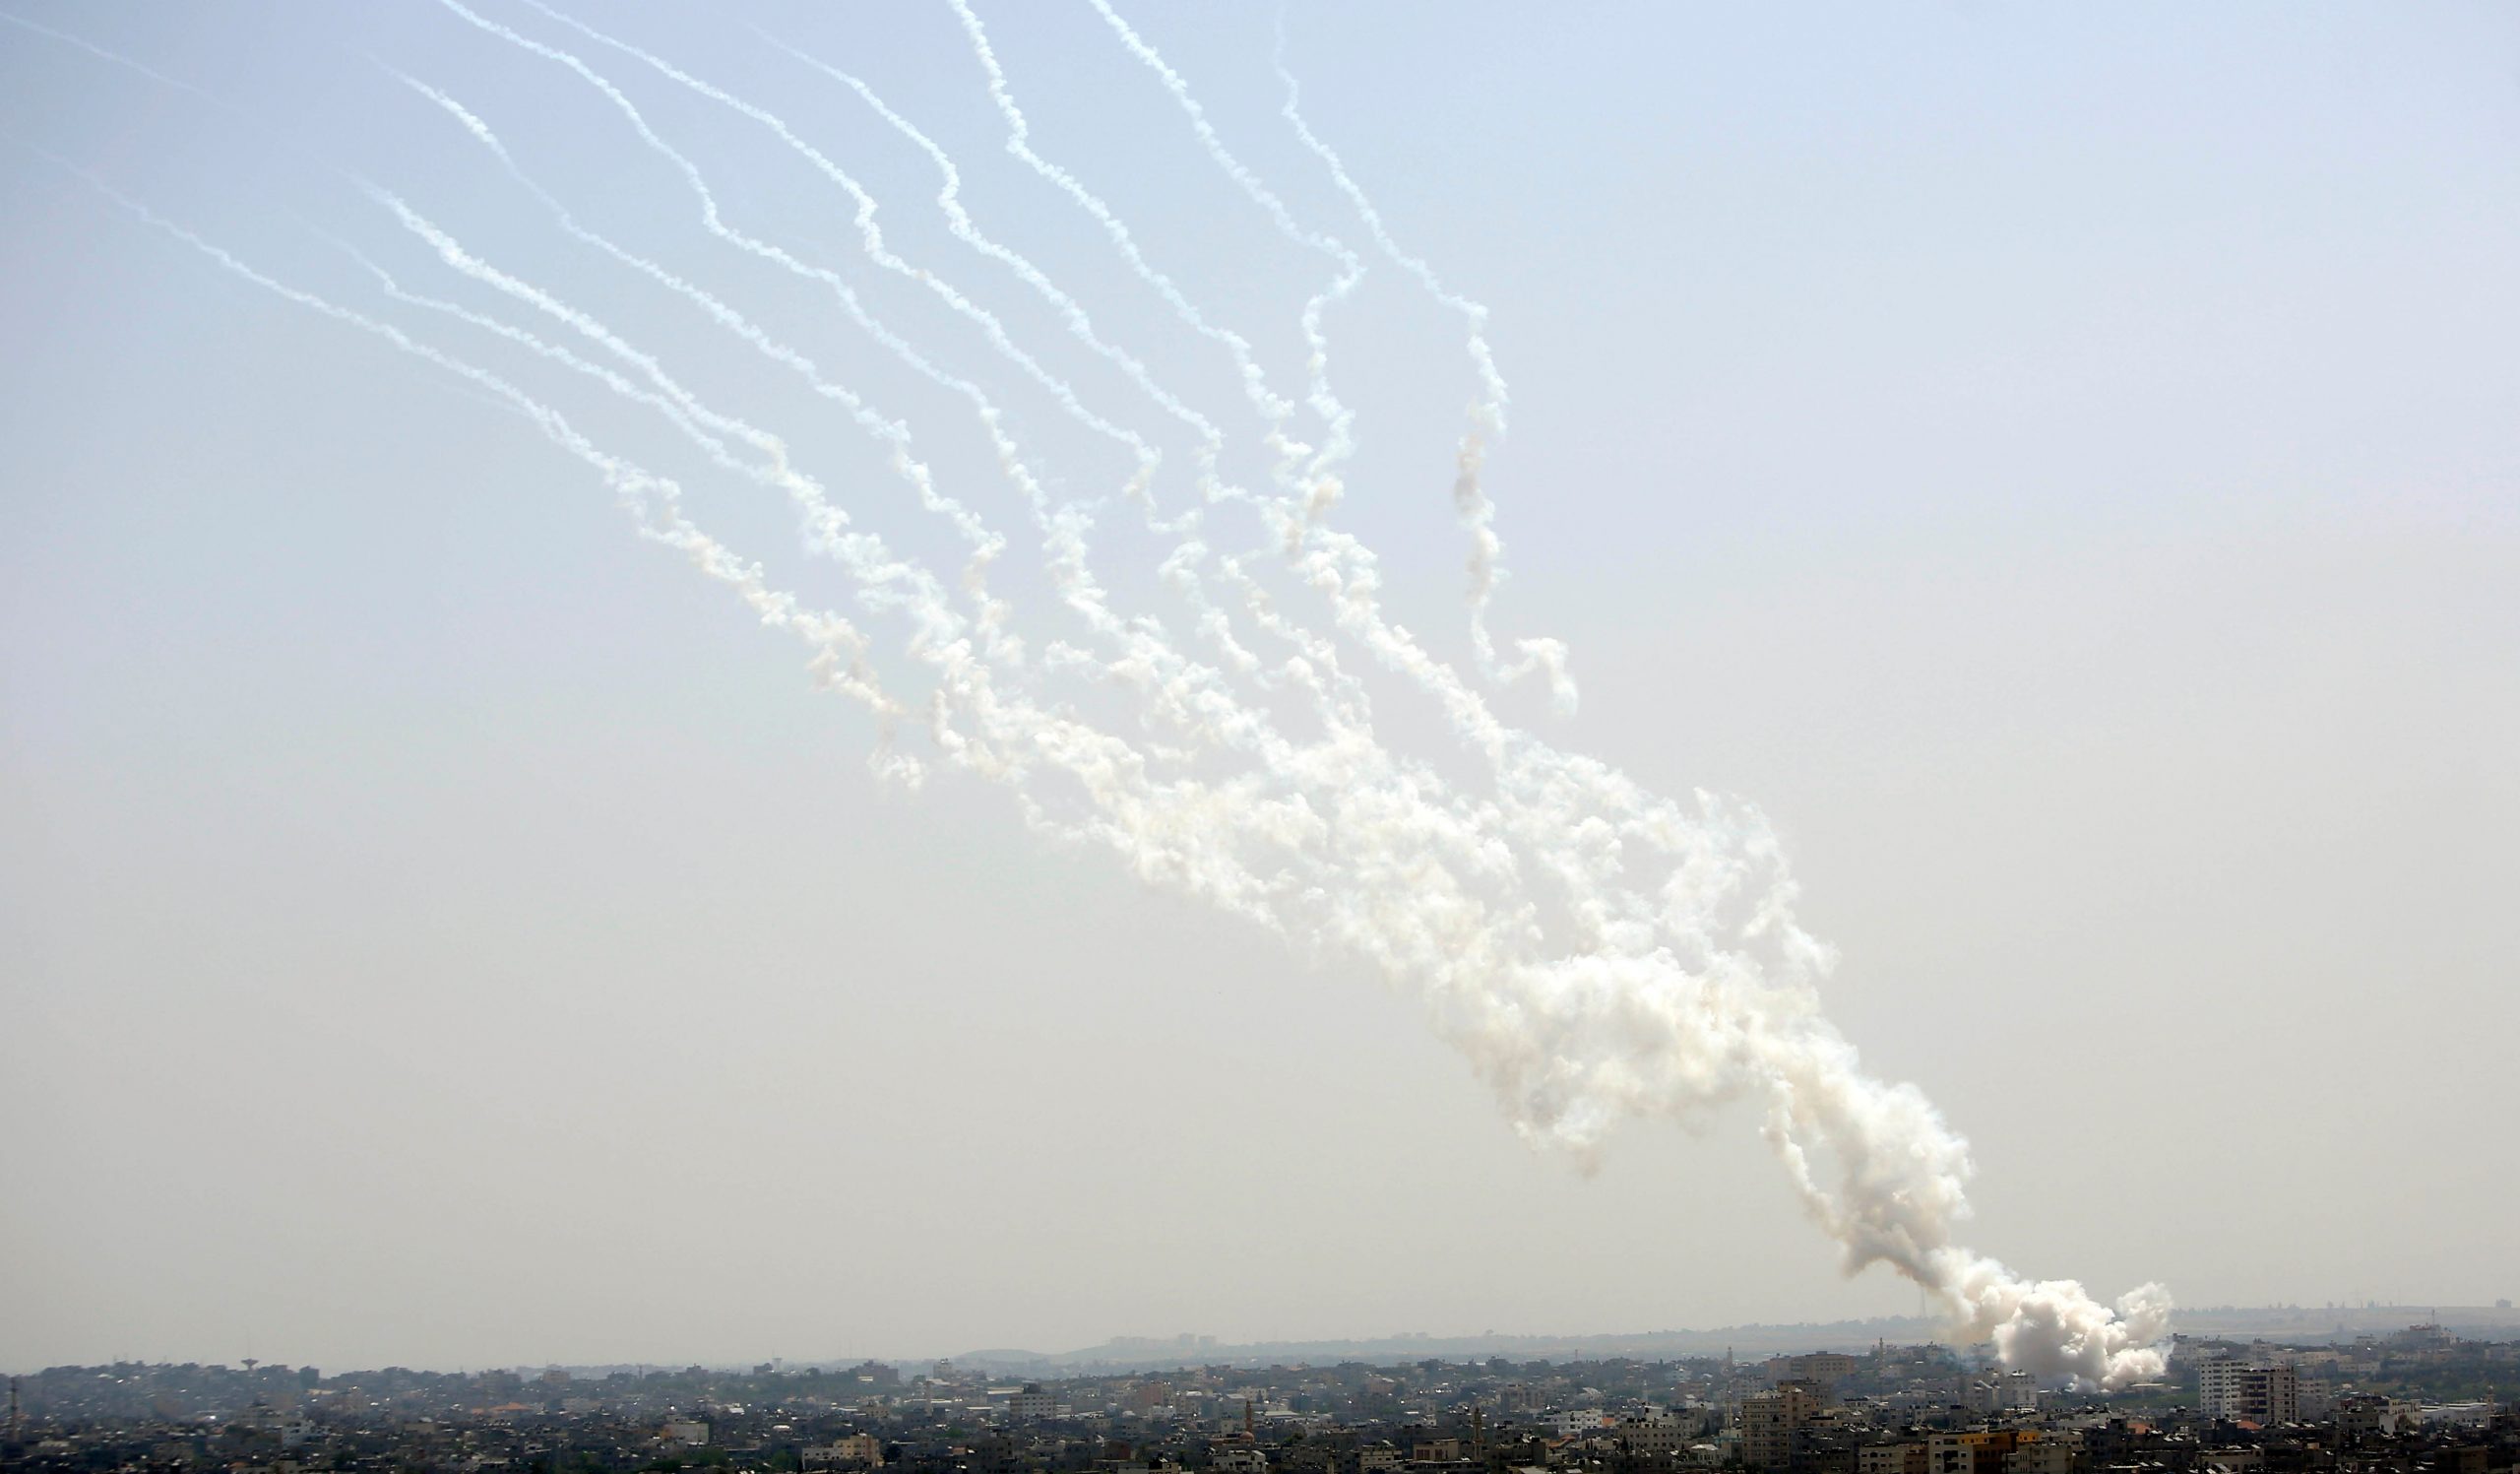 4 rockets fired from Lebanon towards Israel: Report